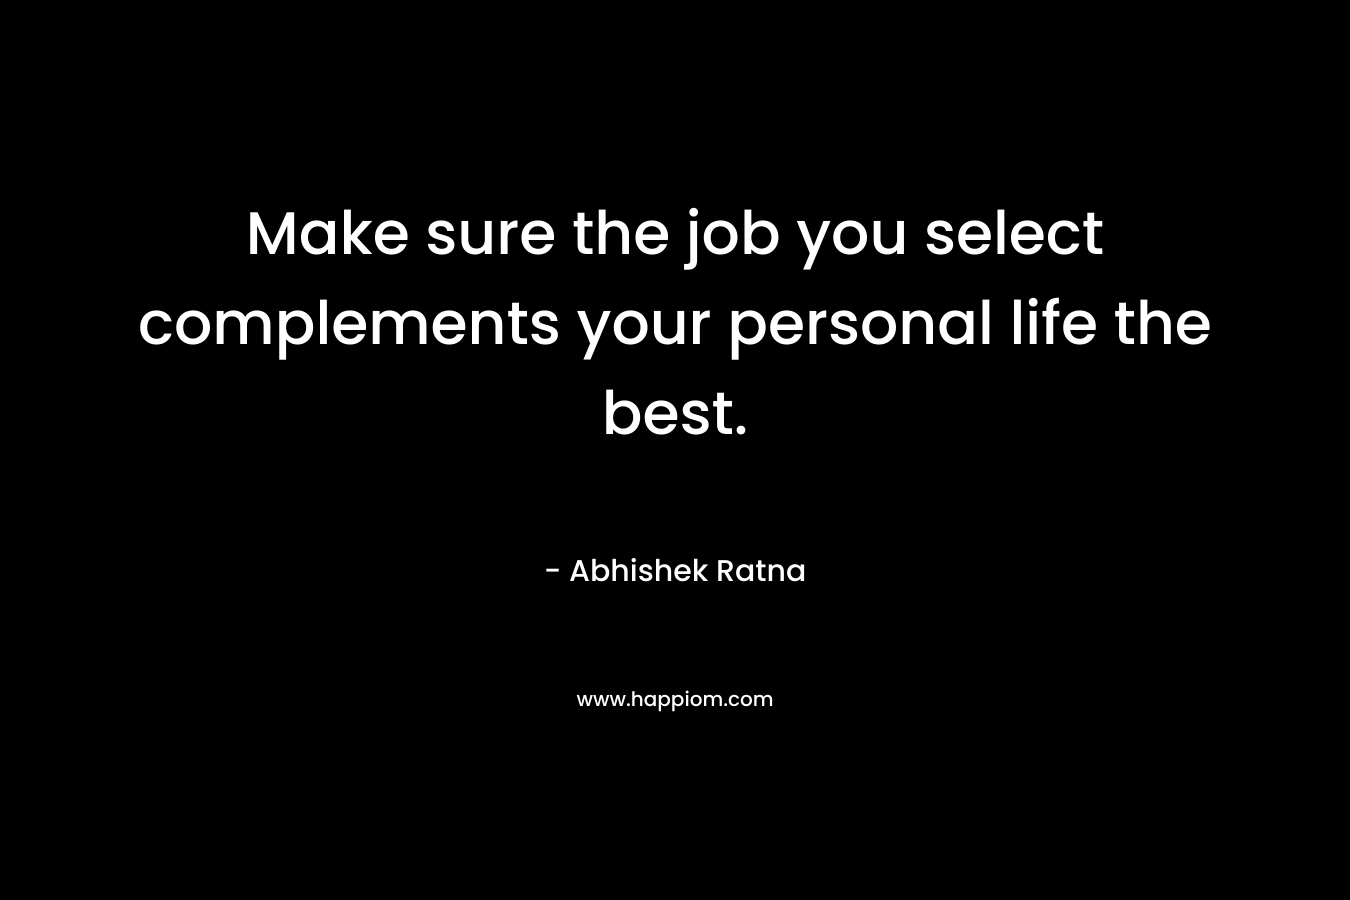 Make sure the job you select complements your personal life the best.